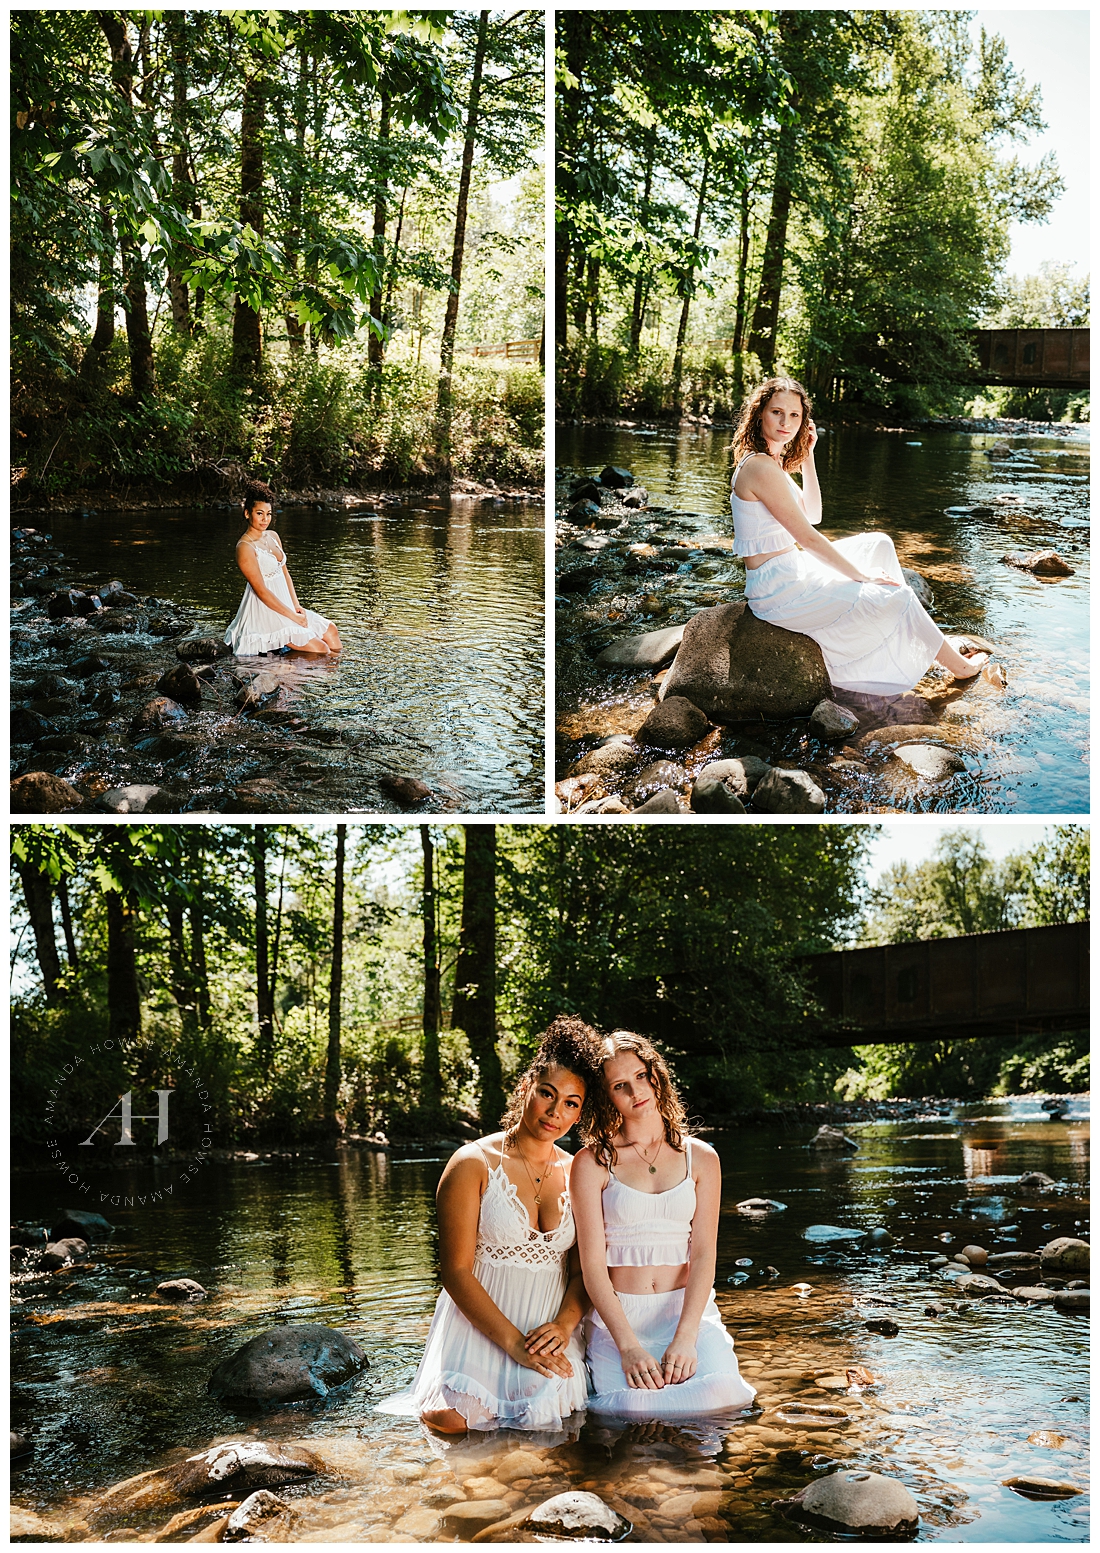 PNW Model Team River Shoot in Washington Summer | Ideas For White Dresses in the Water | Photographed by the Best Tacoma, Washington Senior Photographer Amanda Howse Photography